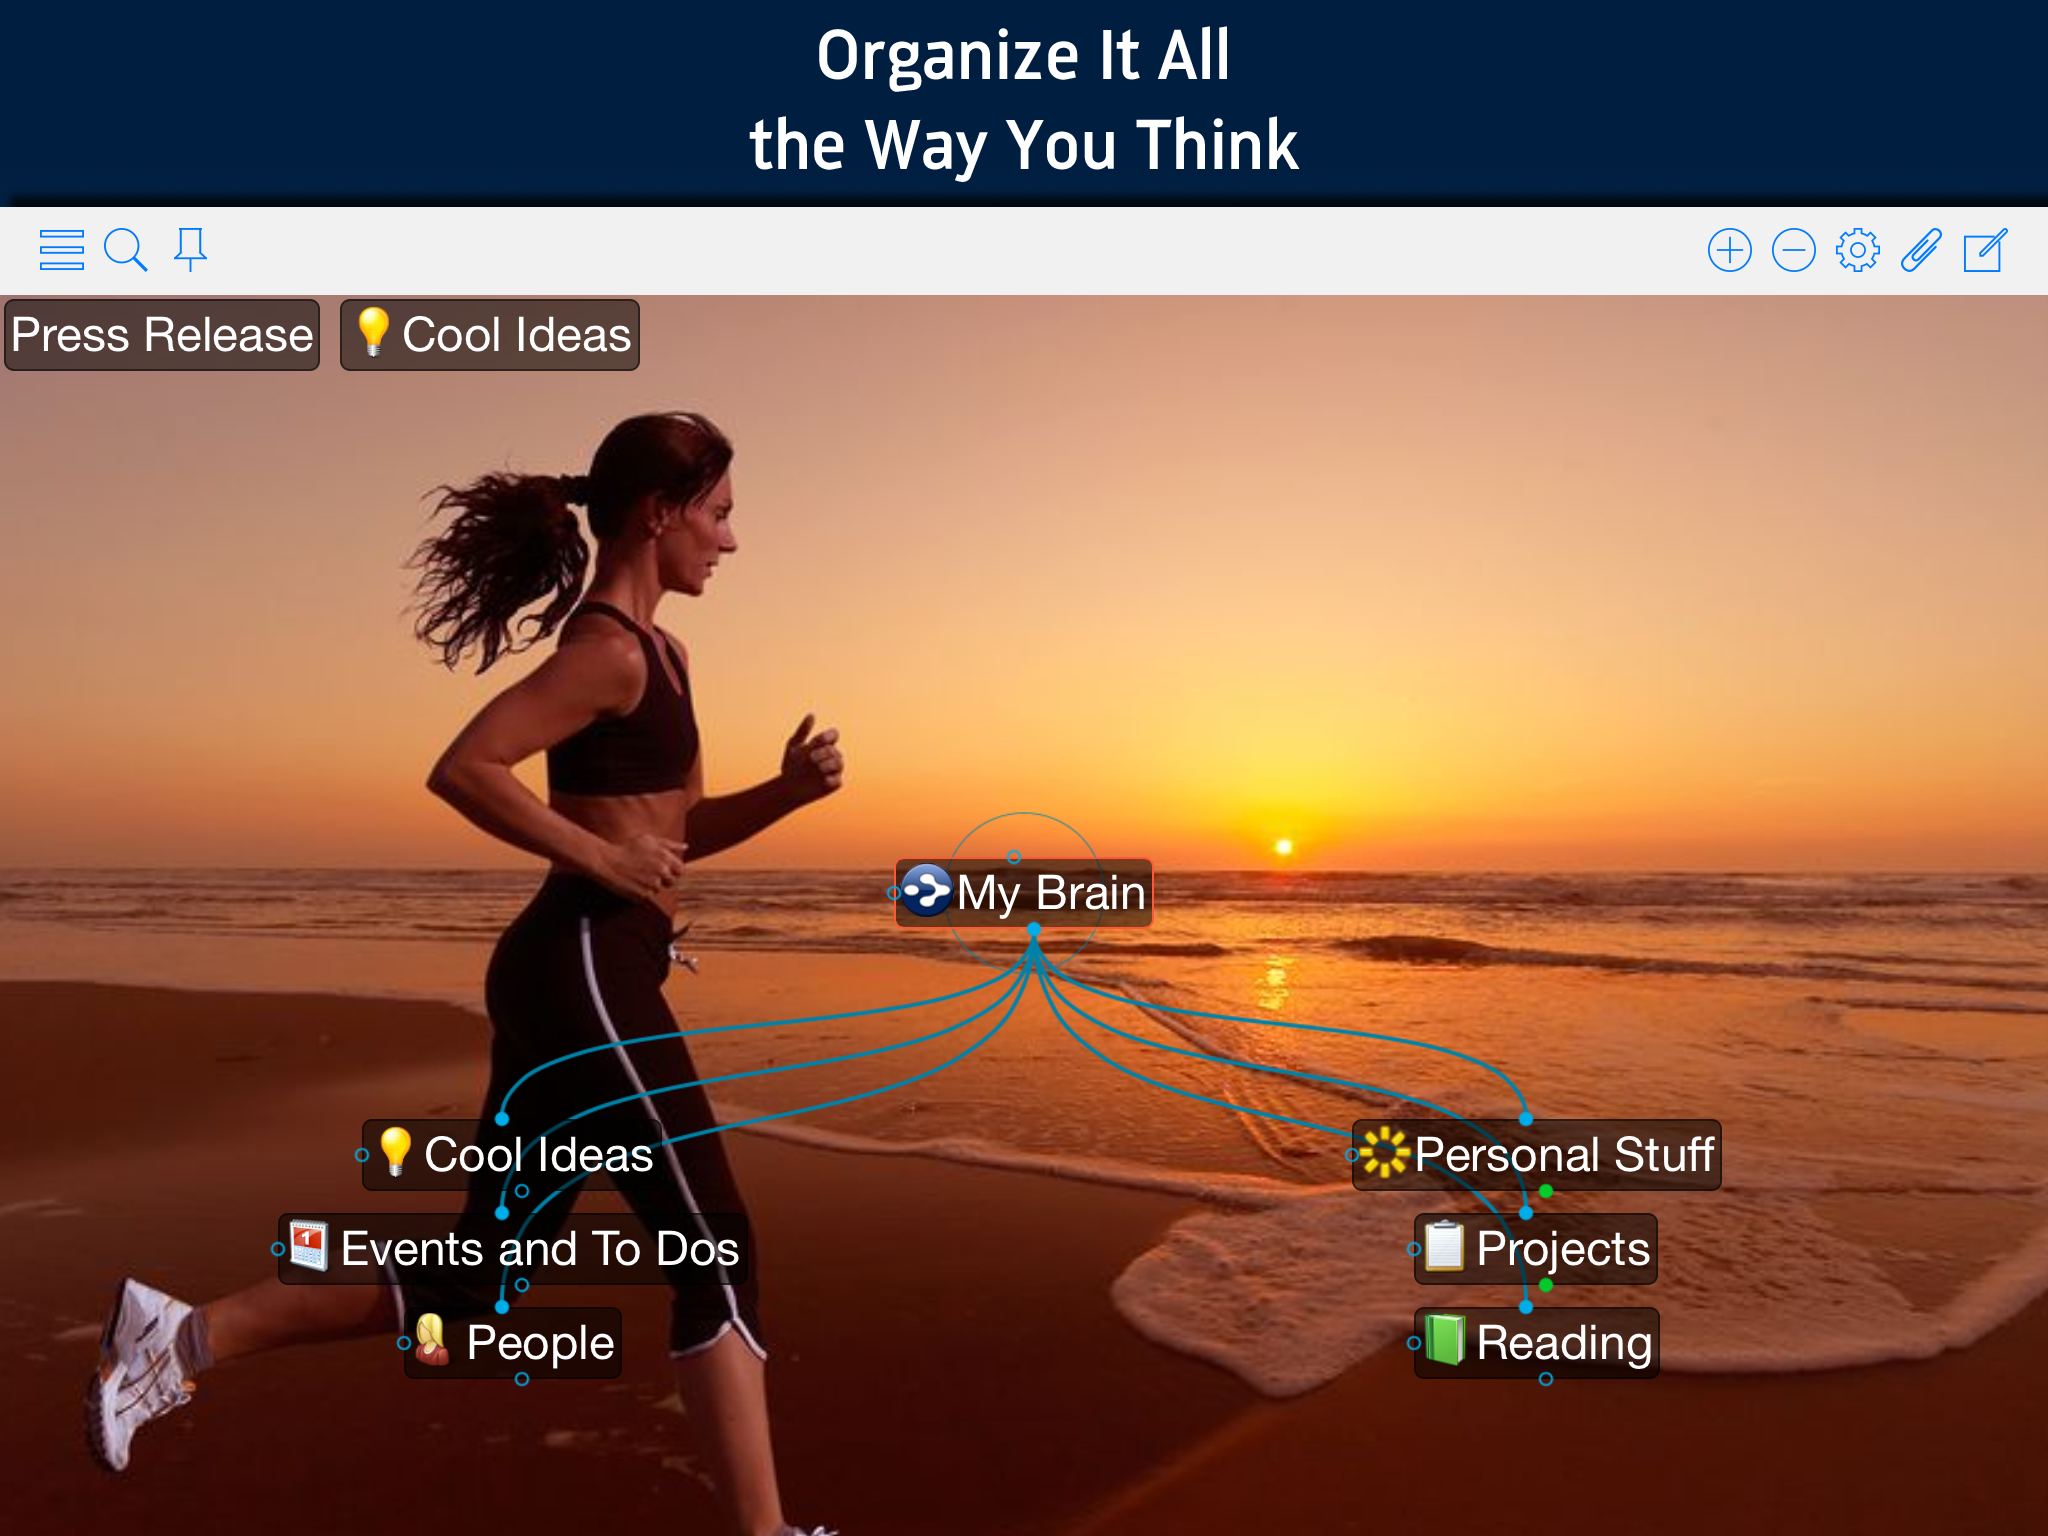 Organize Everything the Way You Think